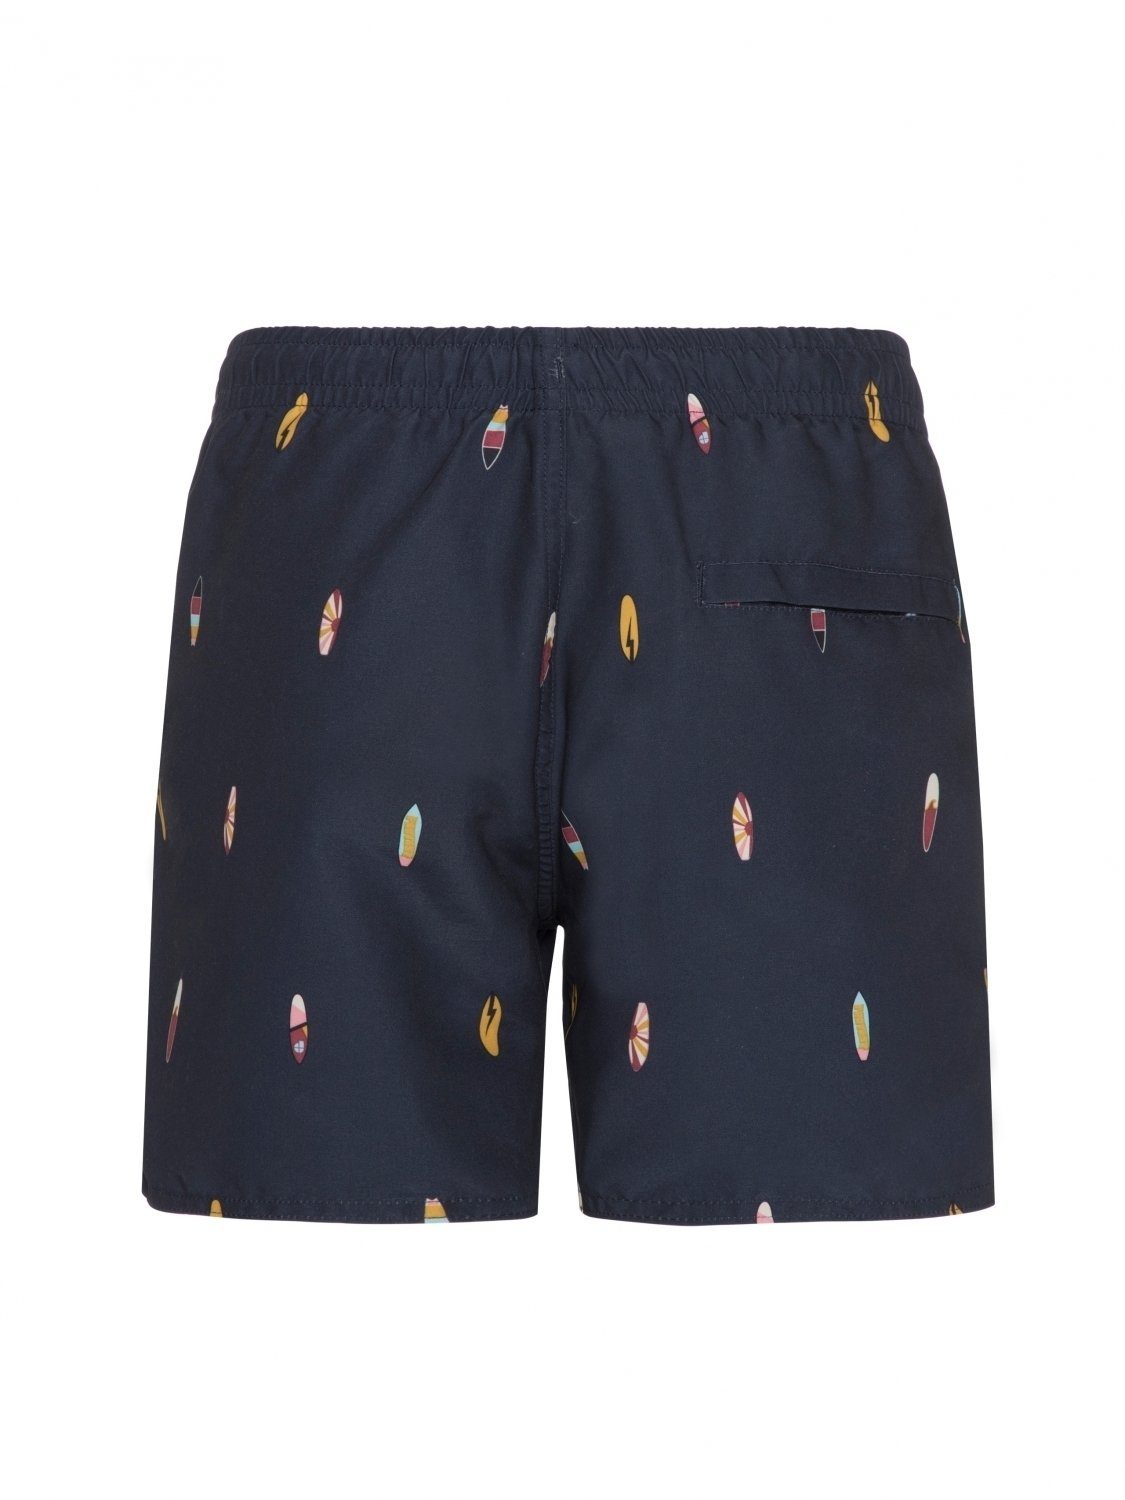 Protest Badeshorts Protest Prttyko Badehose Jungen